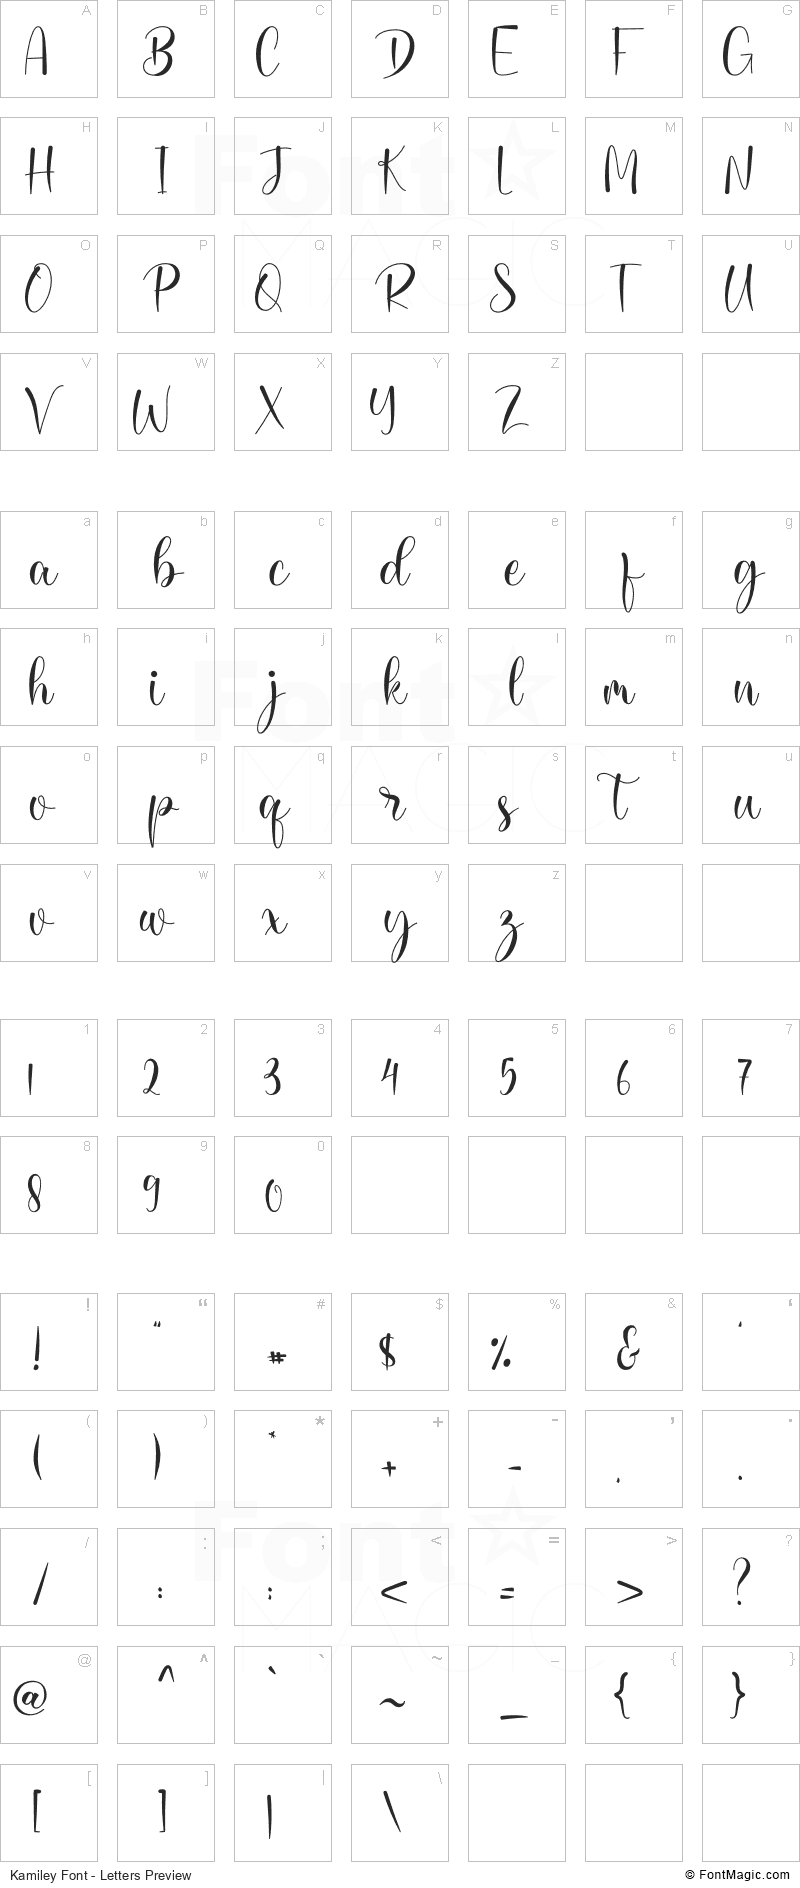 Kamiley Font - All Latters Preview Chart